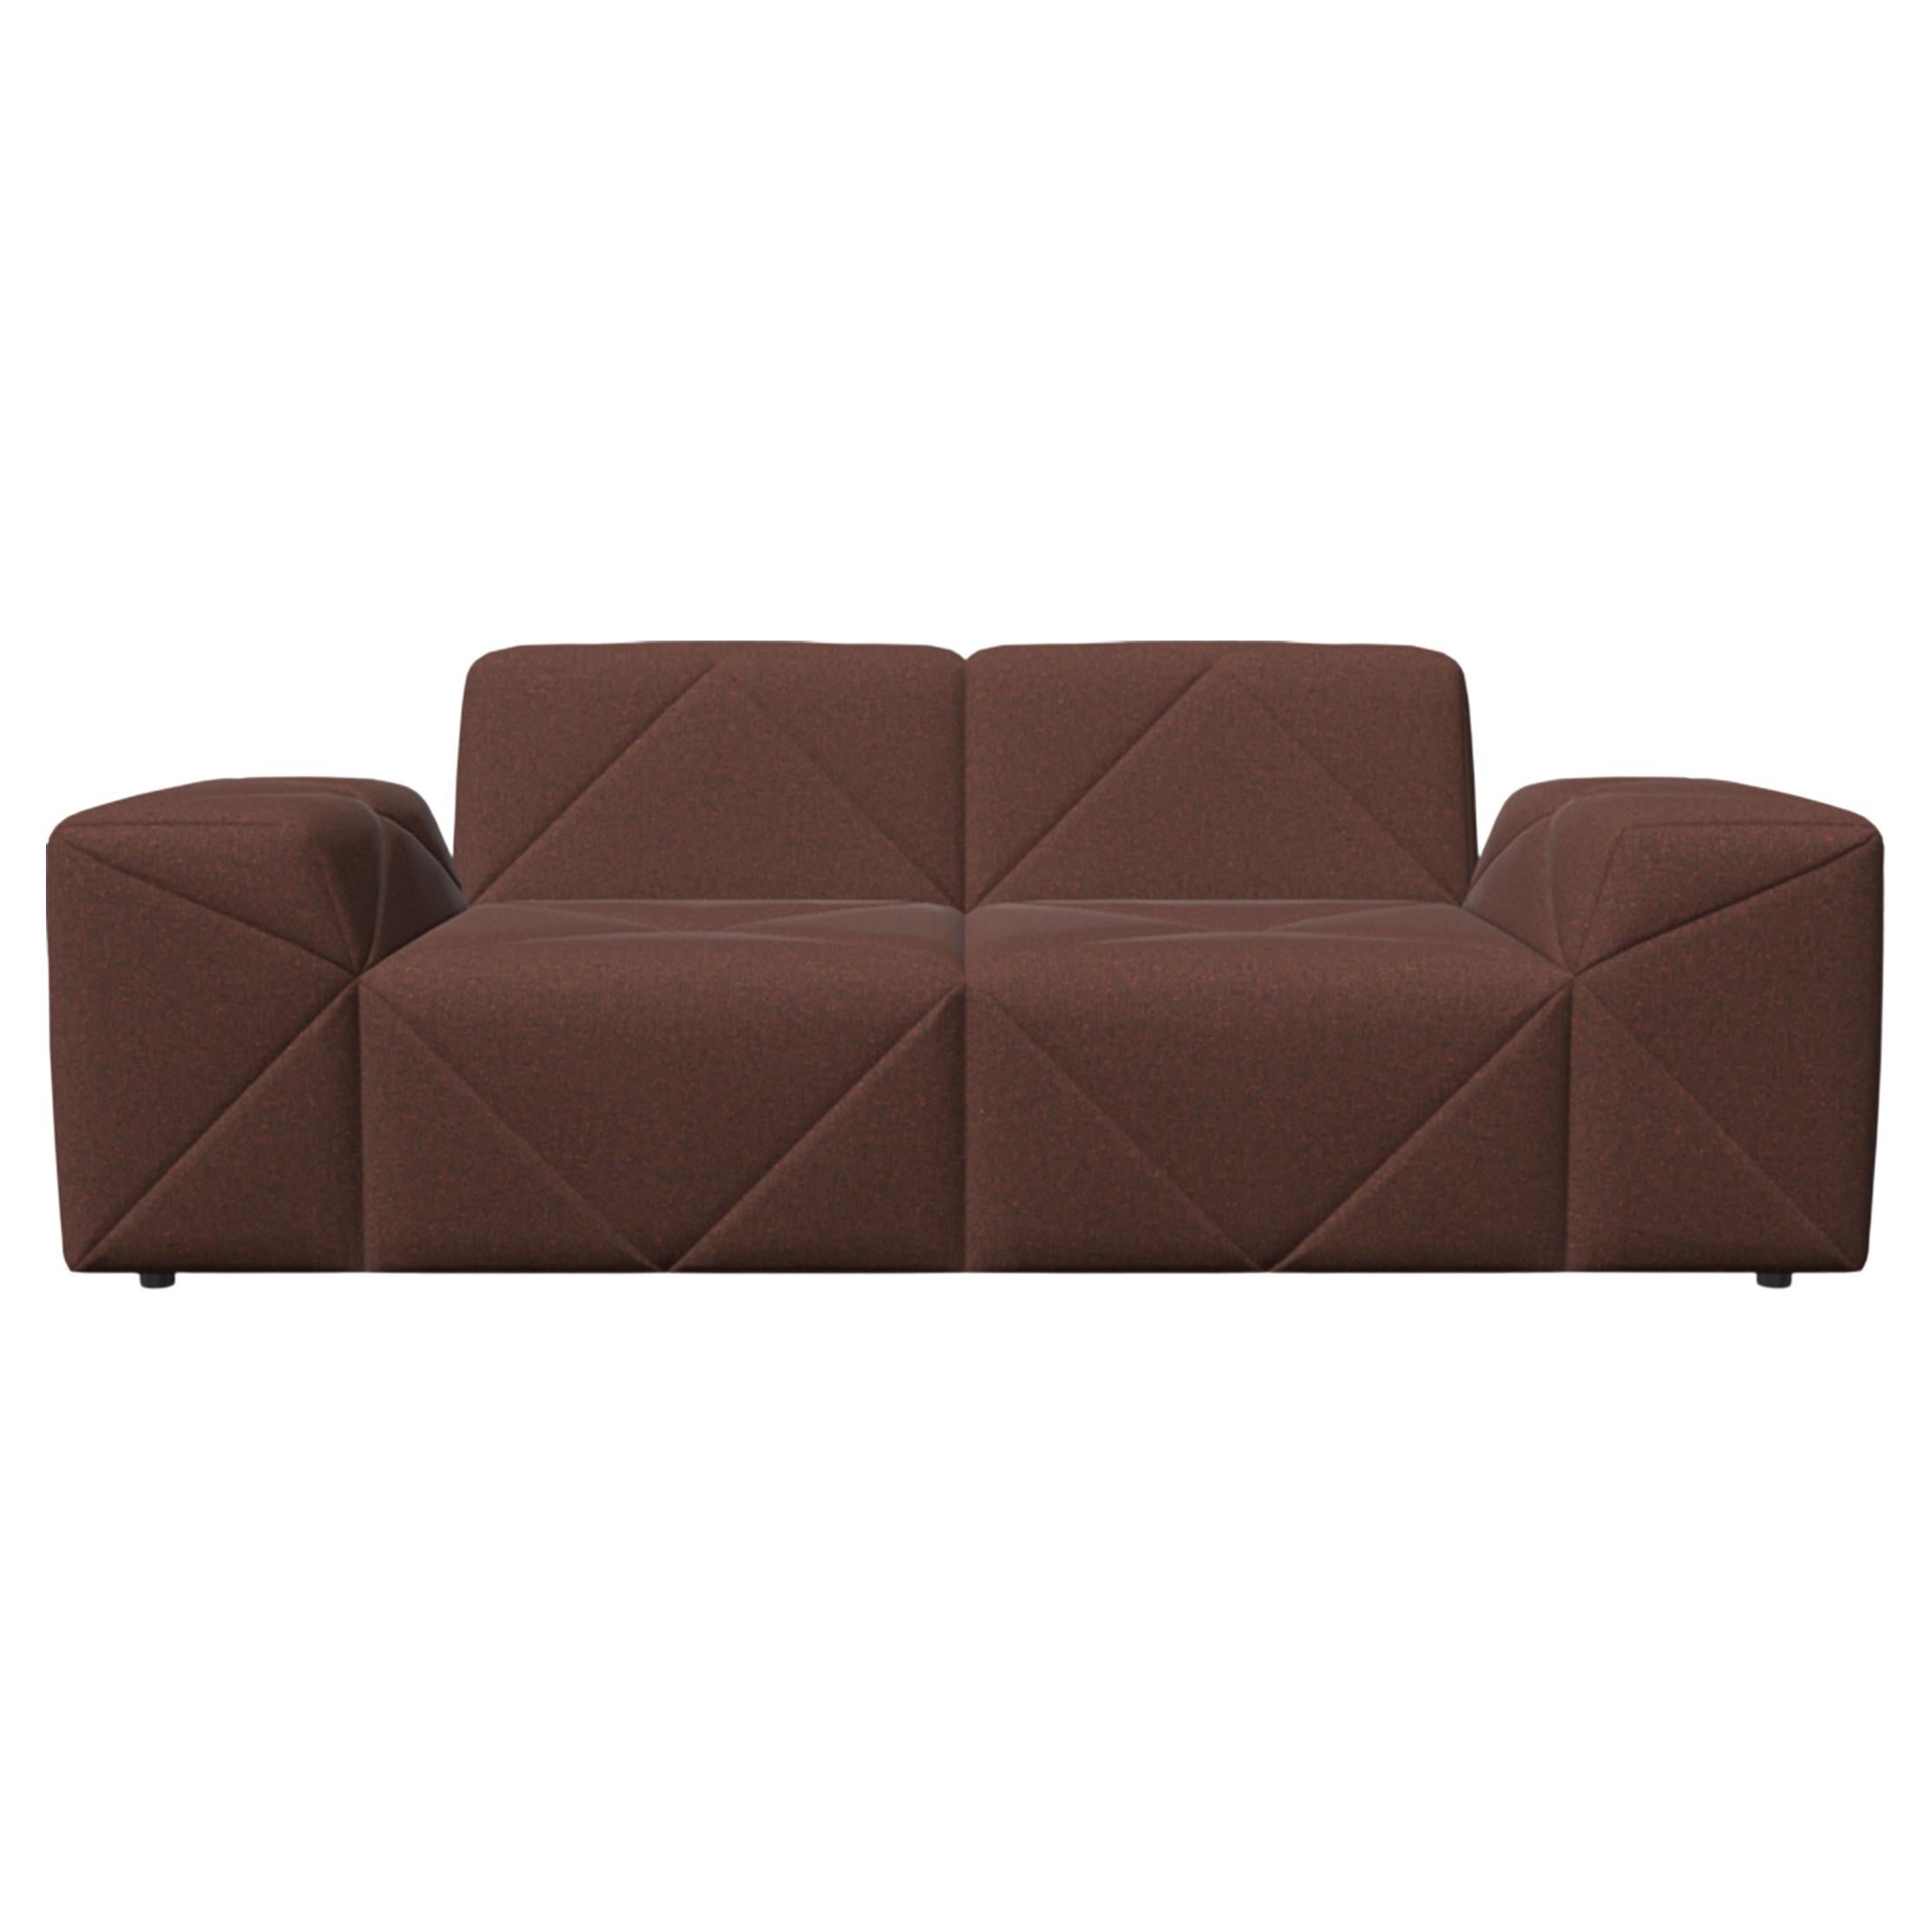 Moooi BFF Double Seater DE01 Low Sofa in Solis, Sunset Red Upholstery